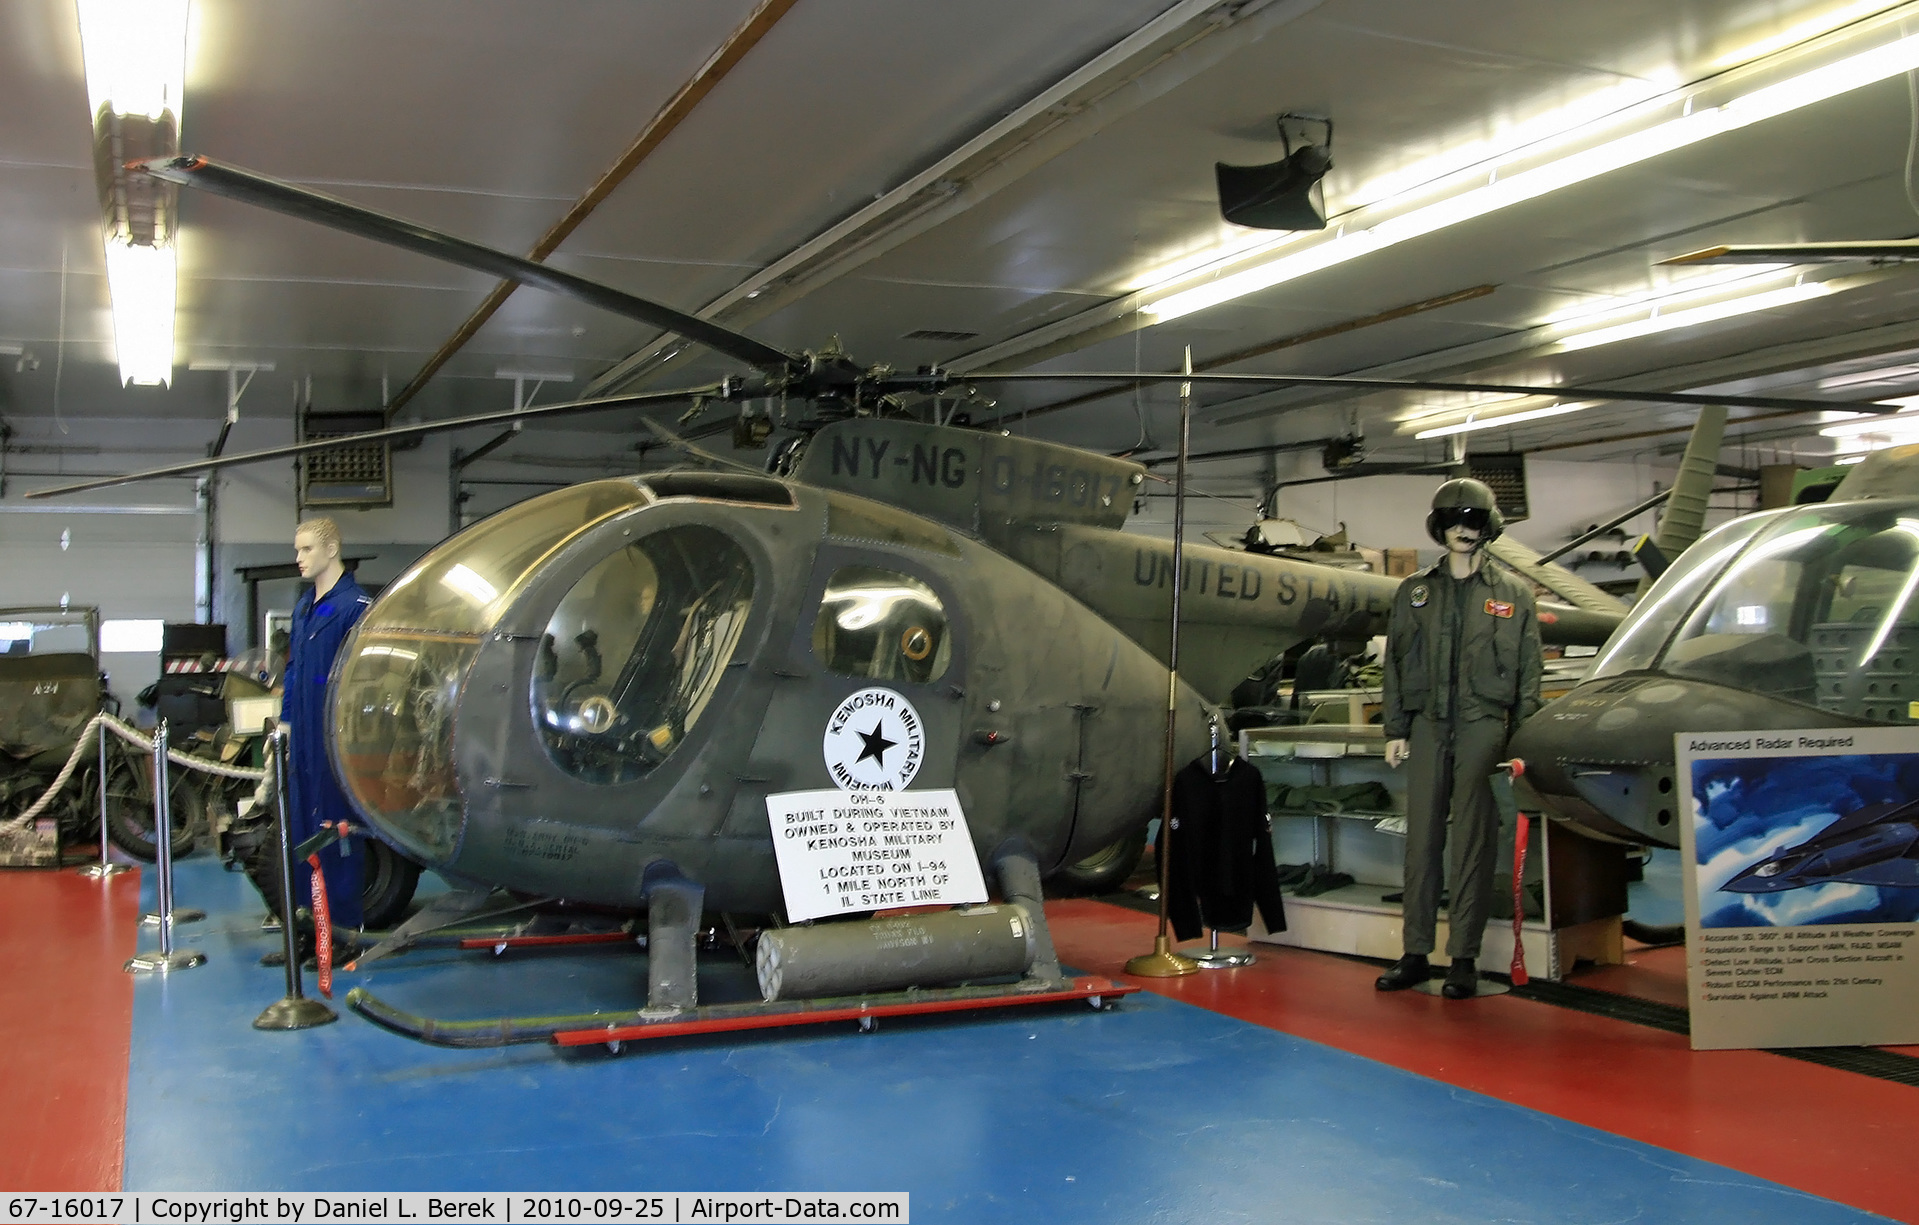 67-16017, 1967 Hughes OH-6A Cayuse C/N 0402, Formerly at the Kenosha Military Museum, this heli has been relocated to the Russell Military Museum, several miles south.